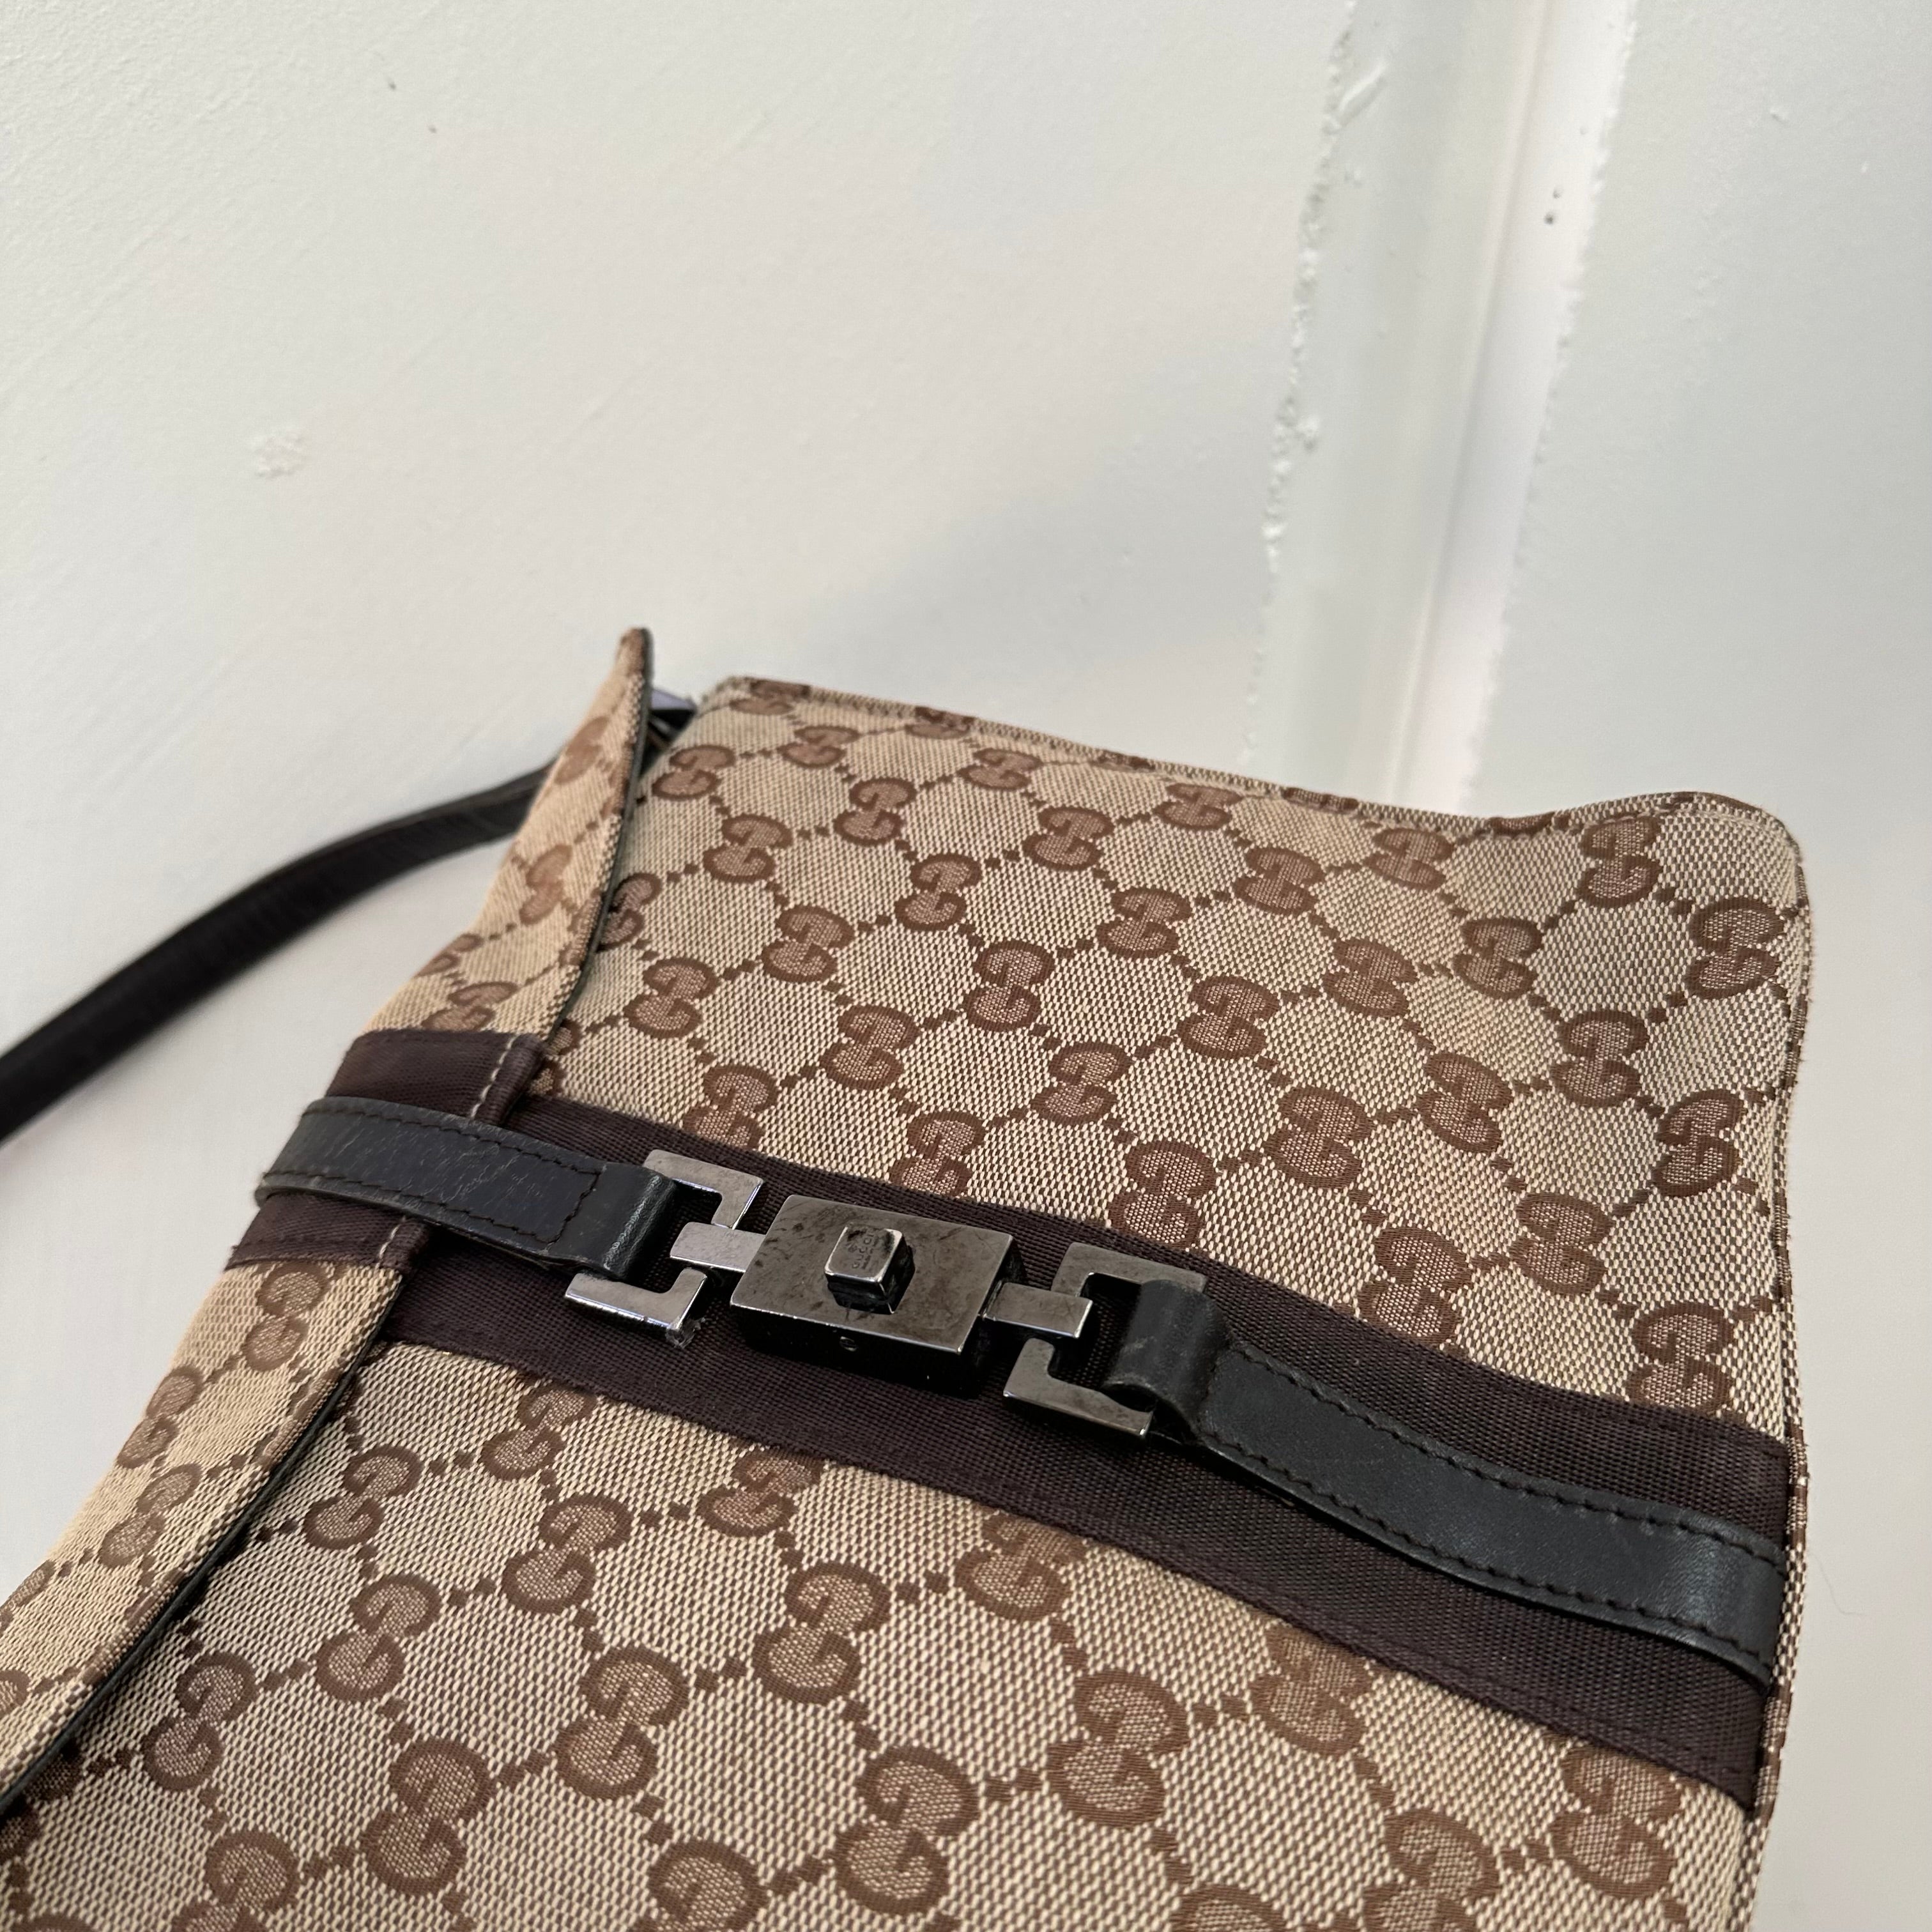 Gucci GG Canvas Jackie Hand Bag Beige